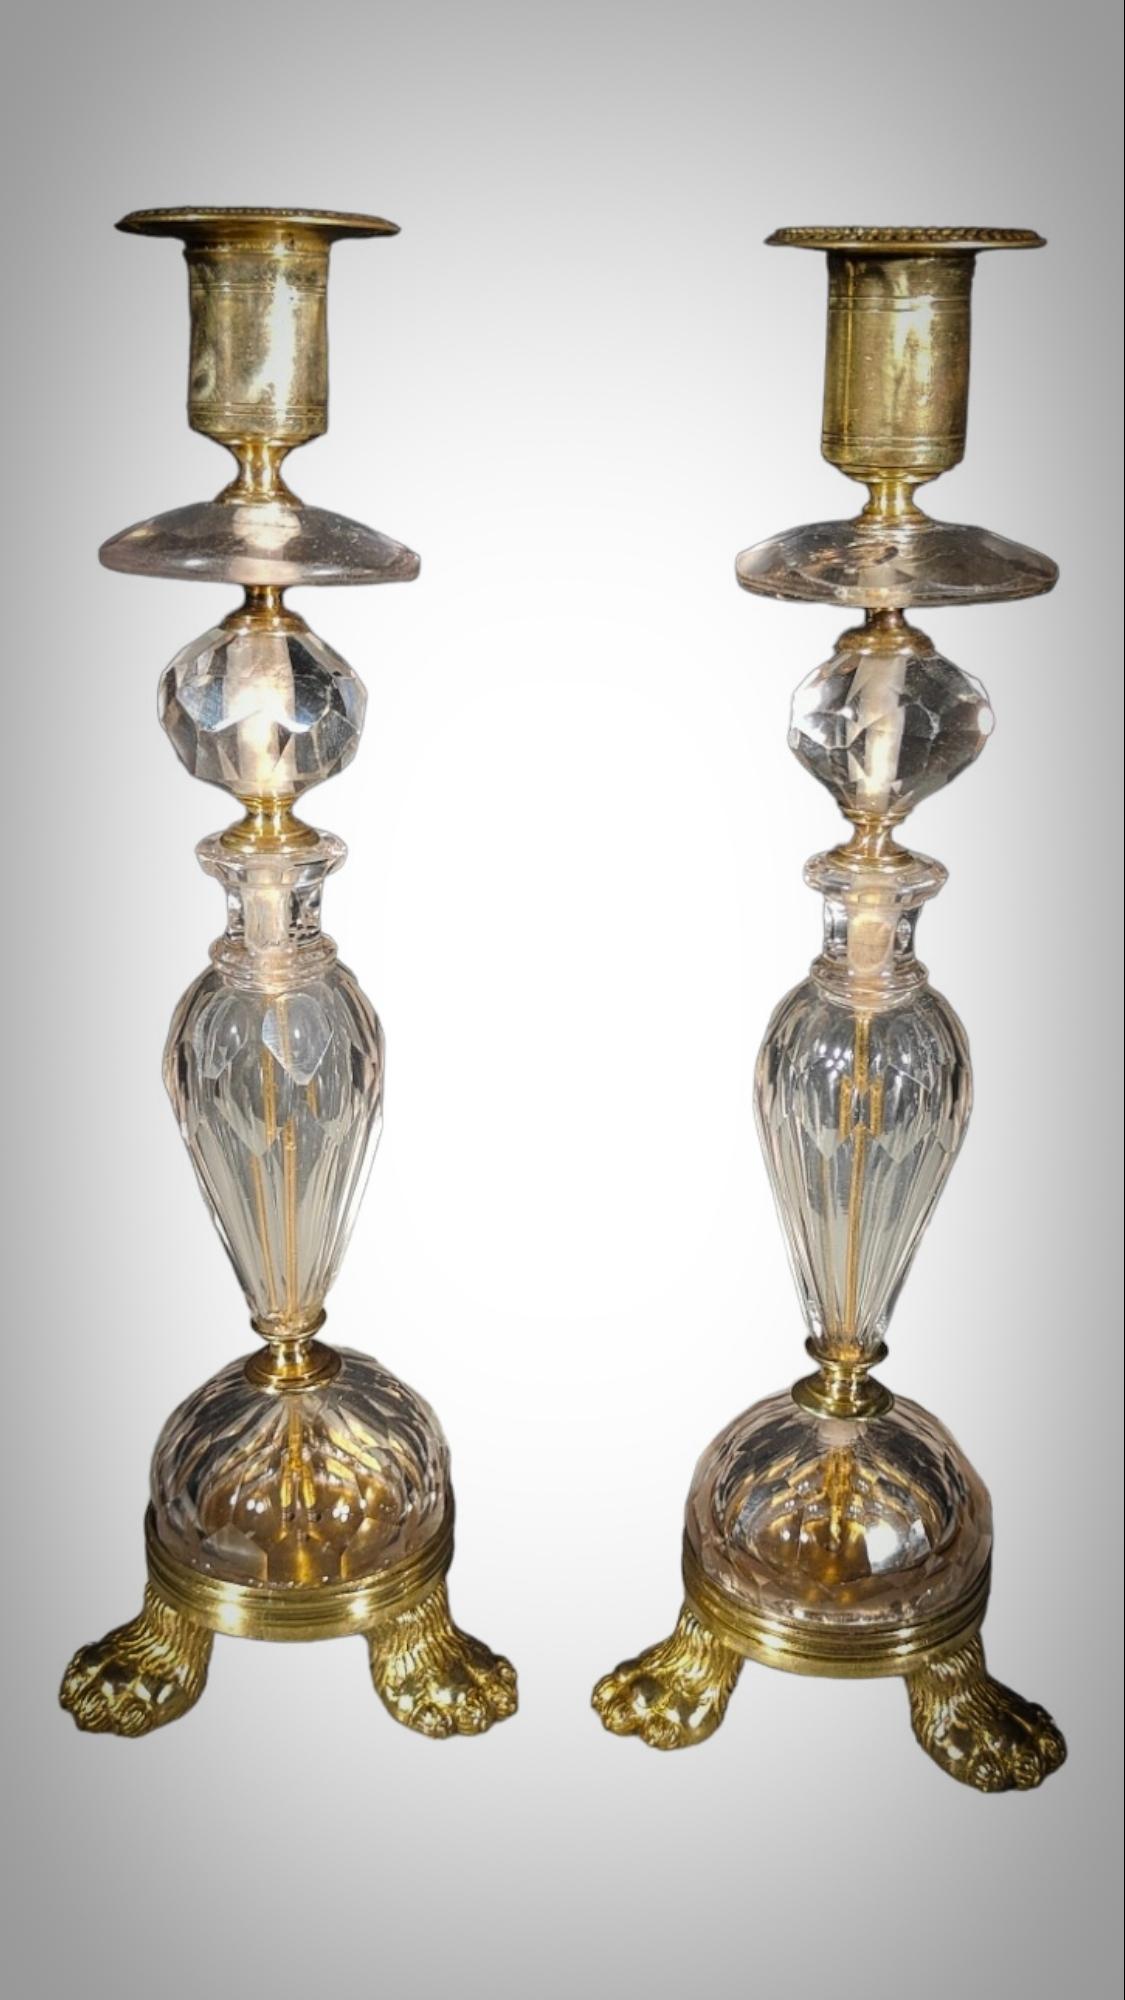 A Pair Of Crystal Candlesticks And Gilt Bronze Mounts, Late 17th Century
Italian carved and polished crystal candlesticks, tiered, faceted, with incised brass detailing. 28x9x9cm